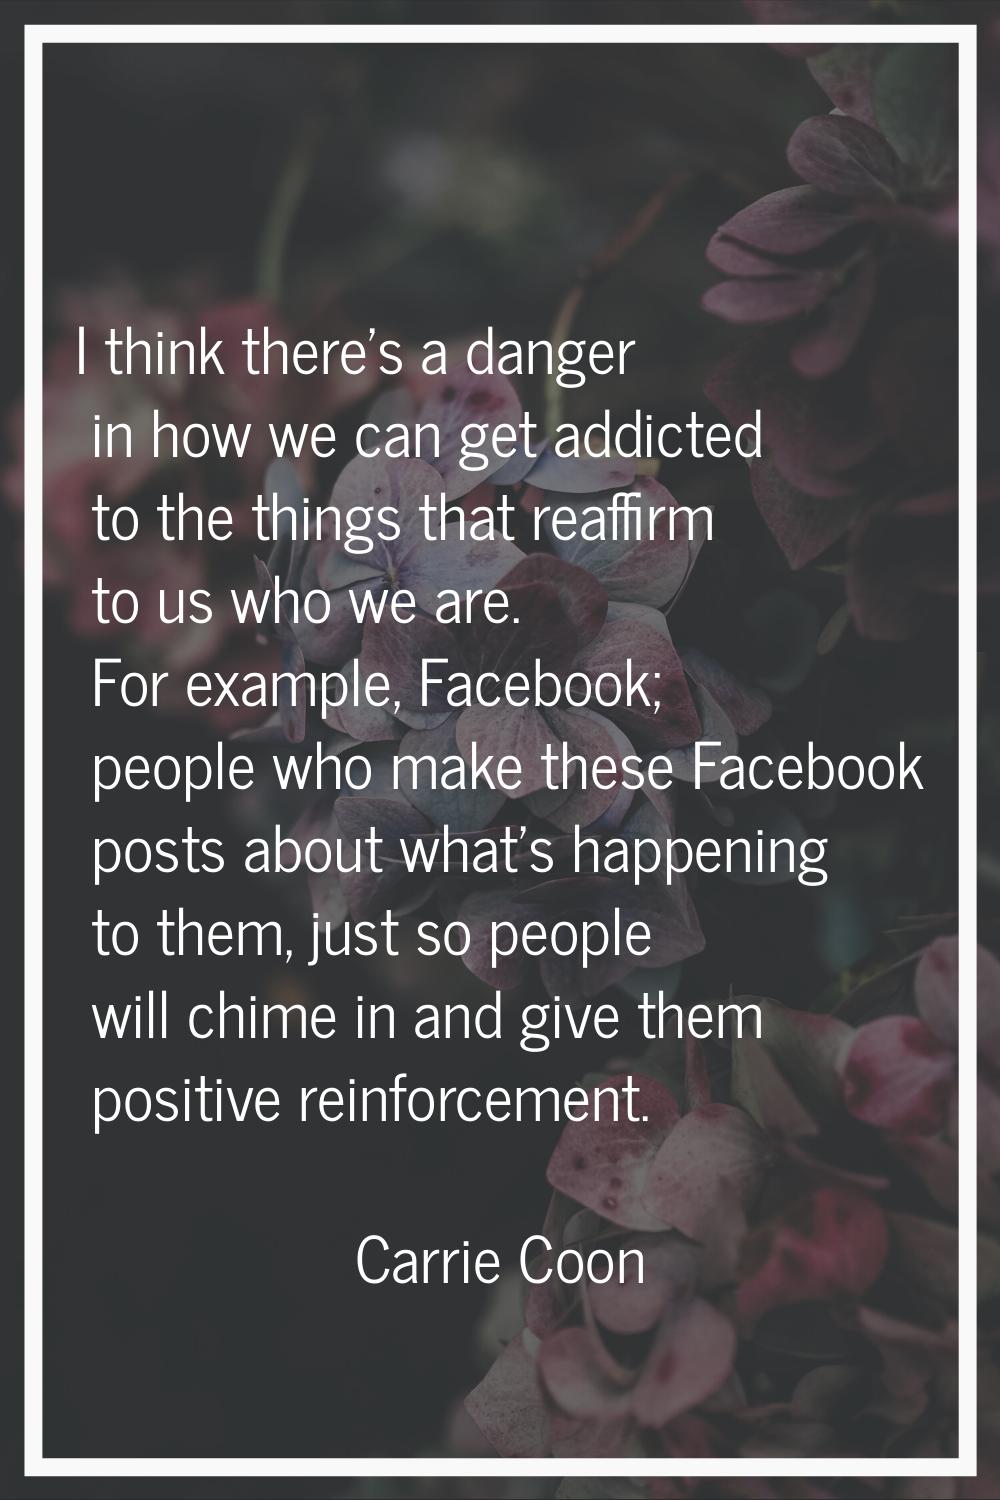 I think there's a danger in how we can get addicted to the things that reaffirm to us who we are. F